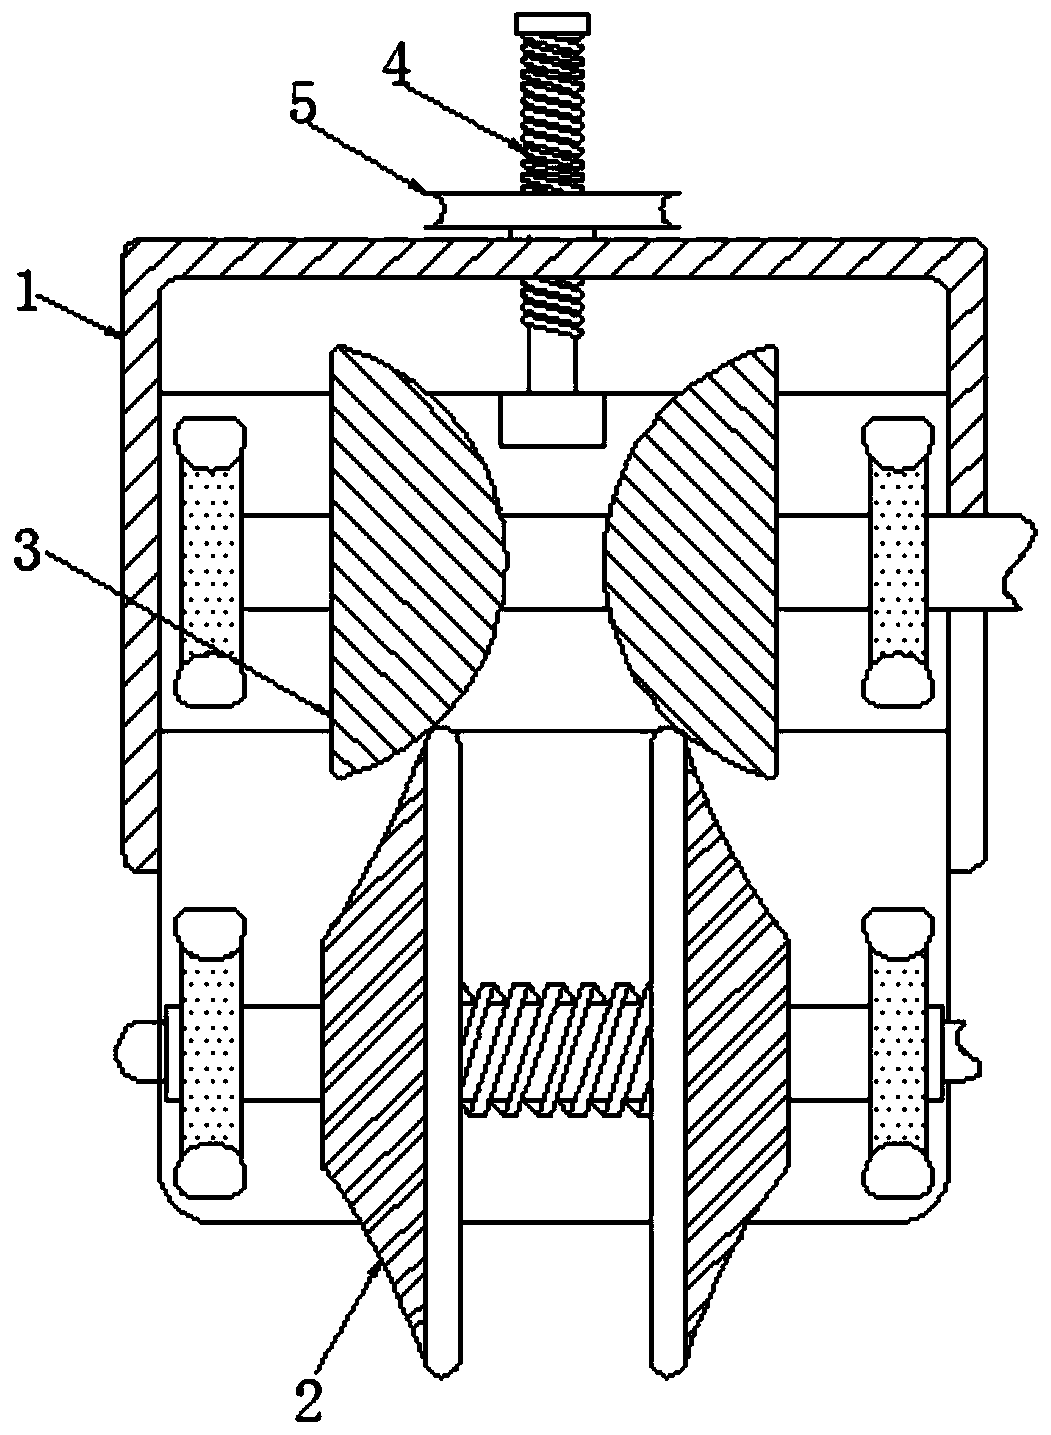 Straw discharging equipment capable of performing intermittent discharging and speed-change pushing, for electricity generation with agricultural garbage